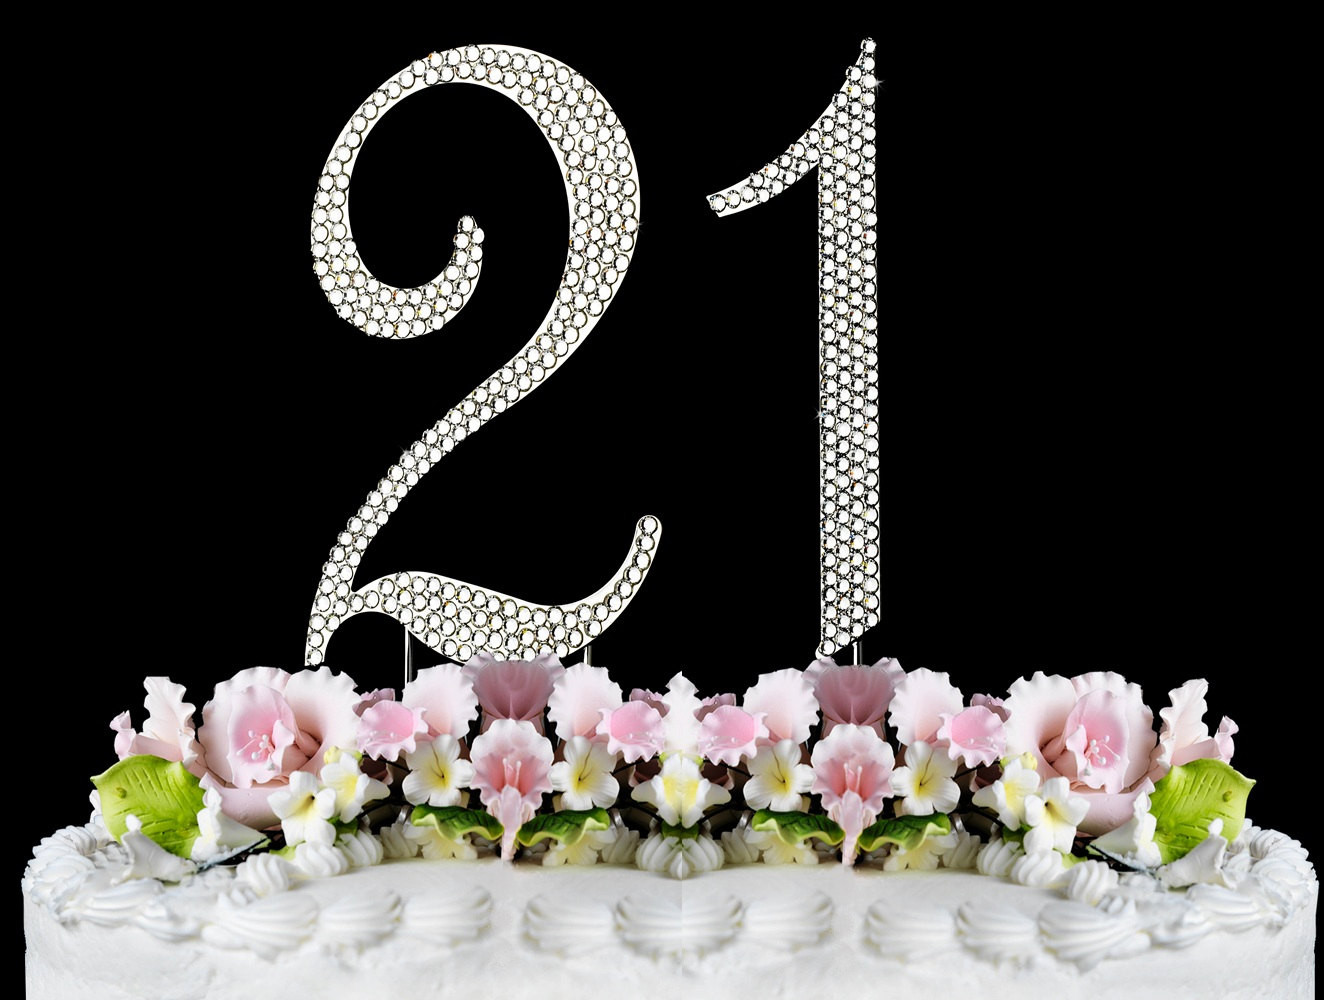 21st Birthday Cake Toppers
 New Rhinestone NUMBER 21 Cake Topper 21th Birthday